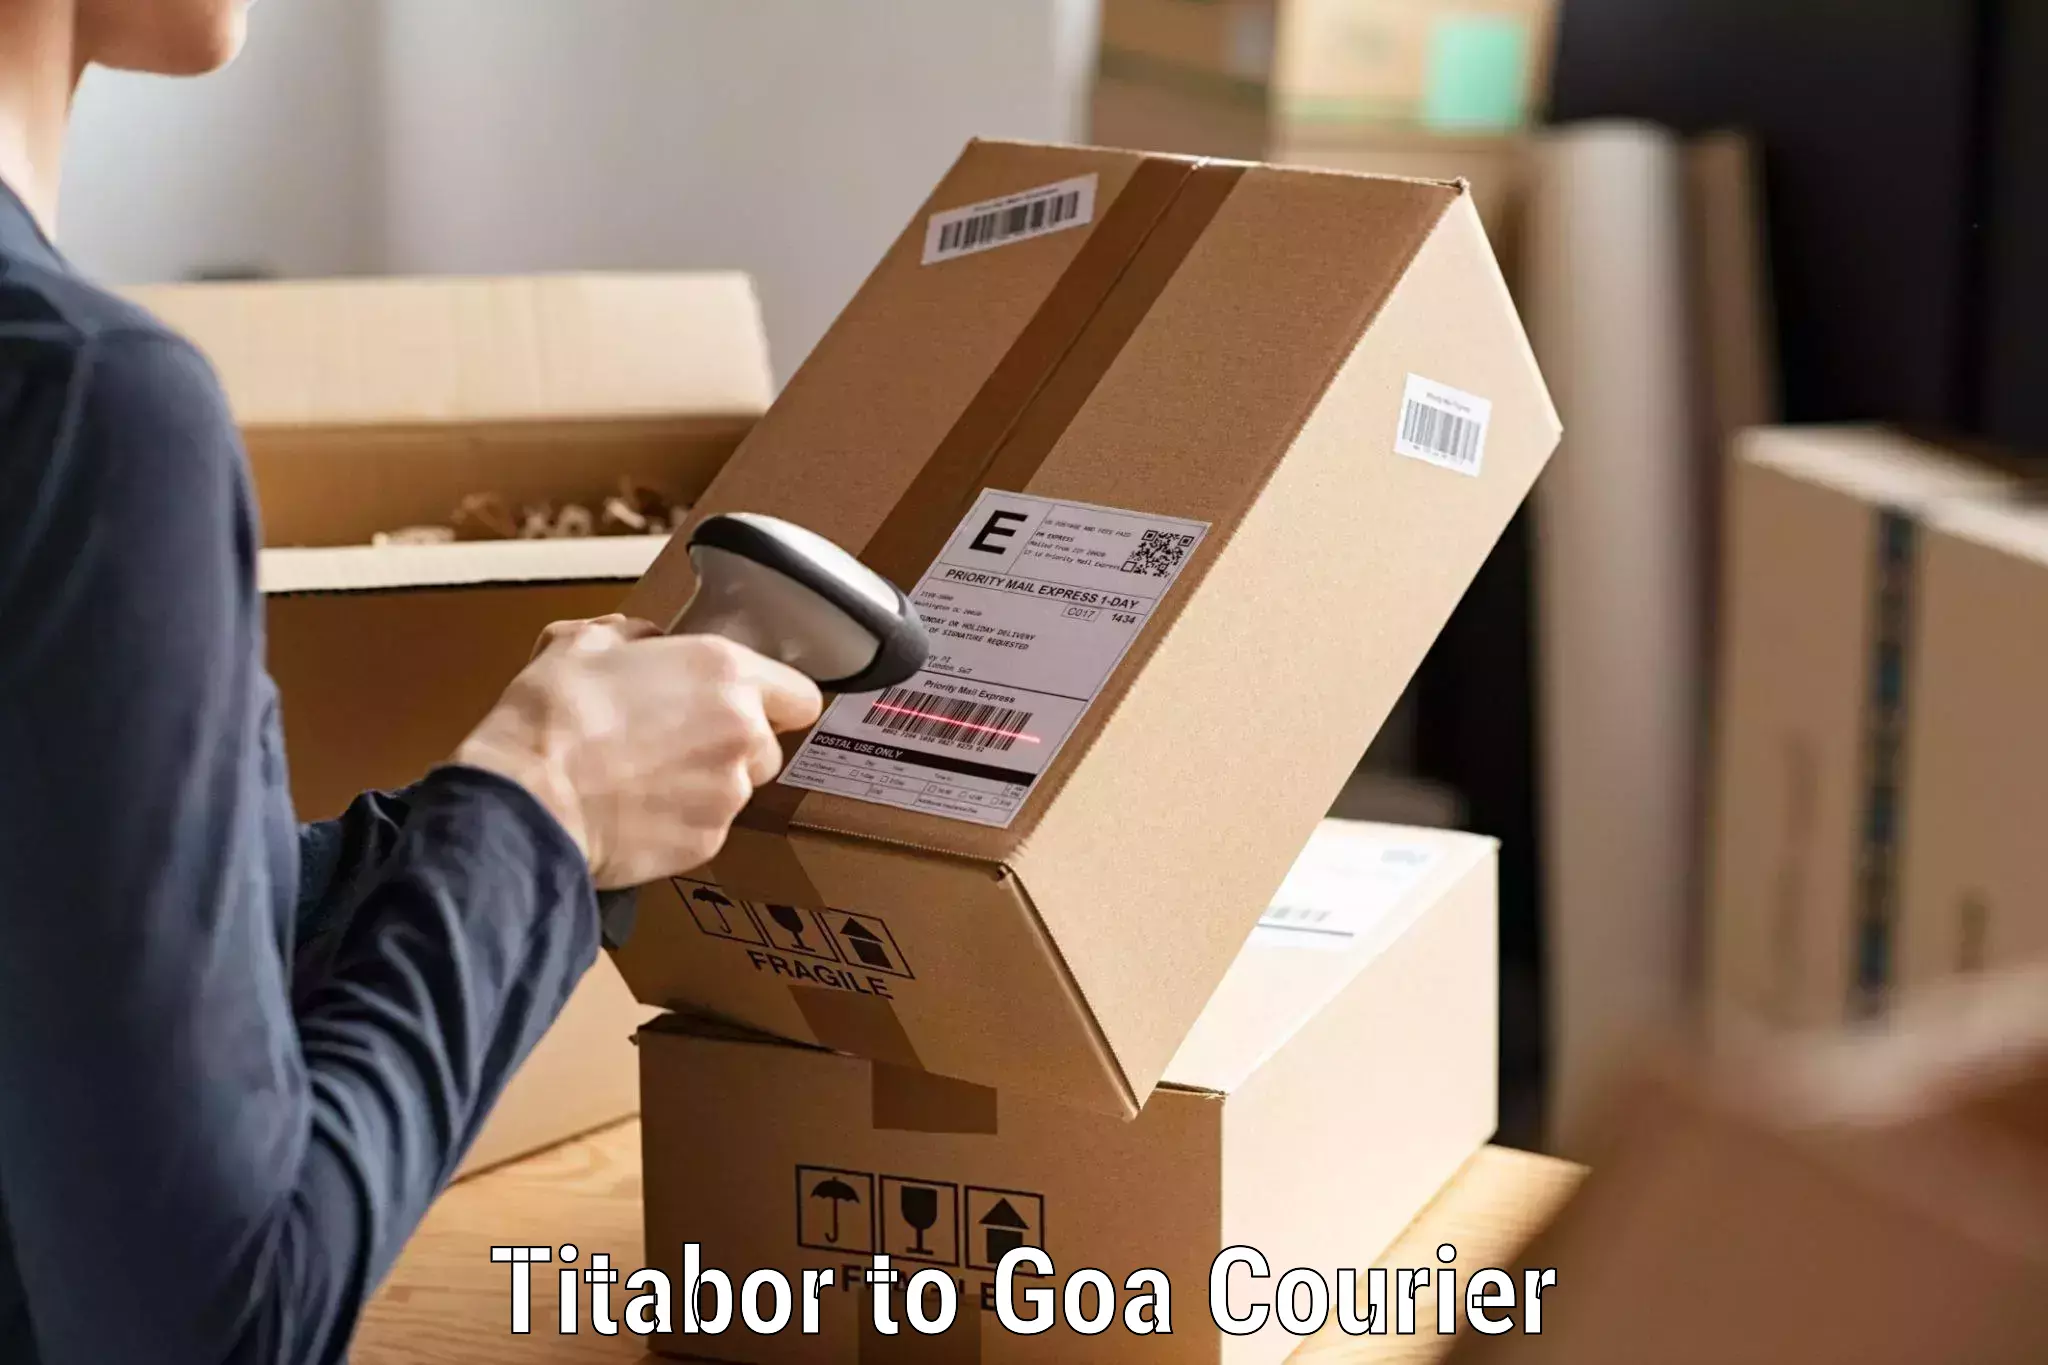 Comprehensive parcel tracking in Titabor to Goa